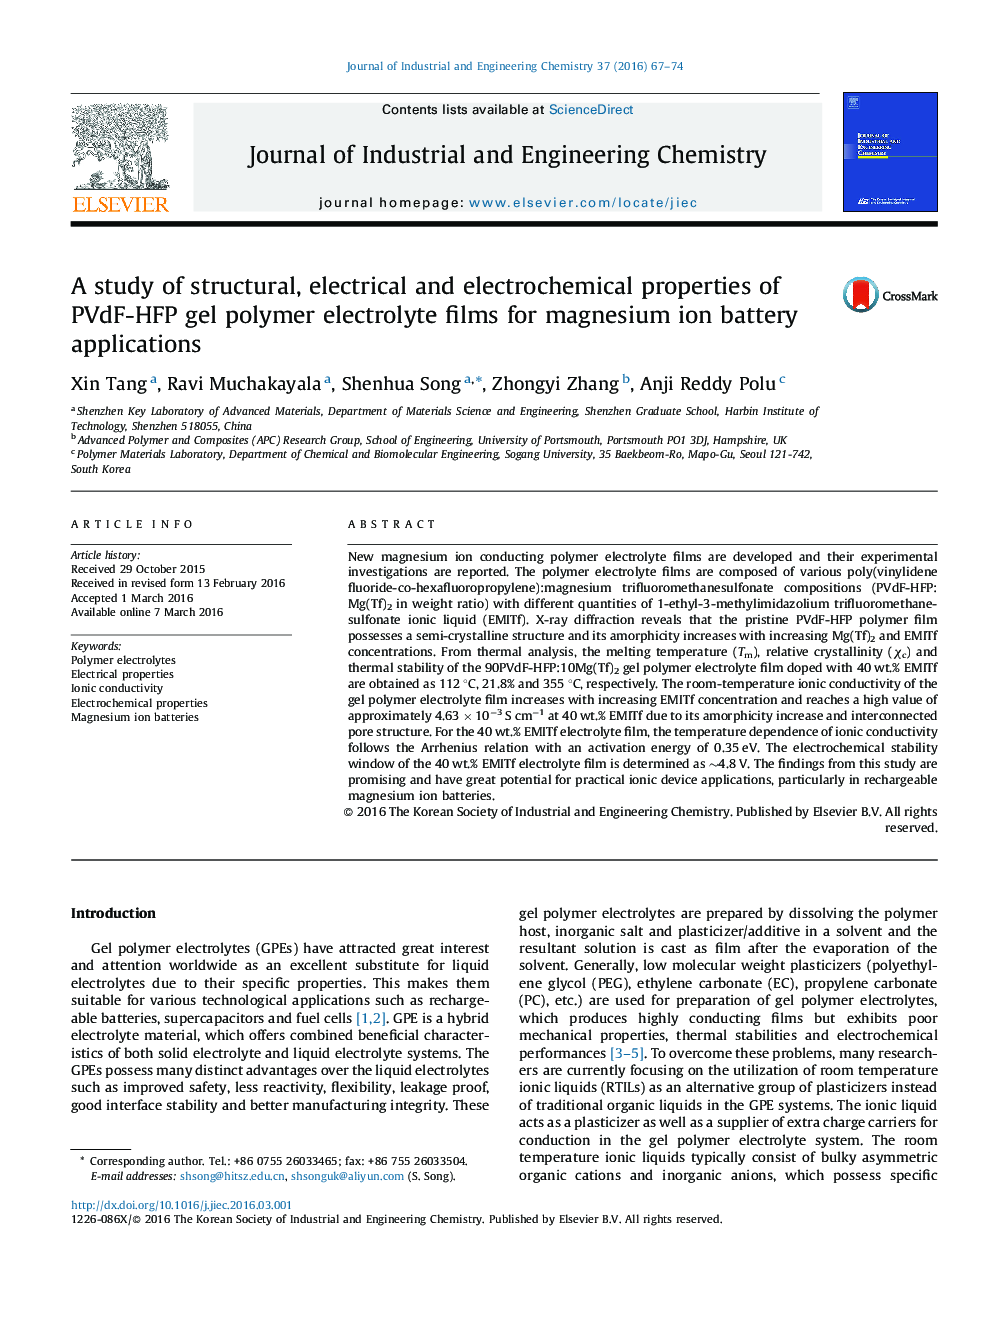 A study of structural, electrical and electrochemical properties of PVdF-HFP gel polymer electrolyte films for magnesium ion battery applications